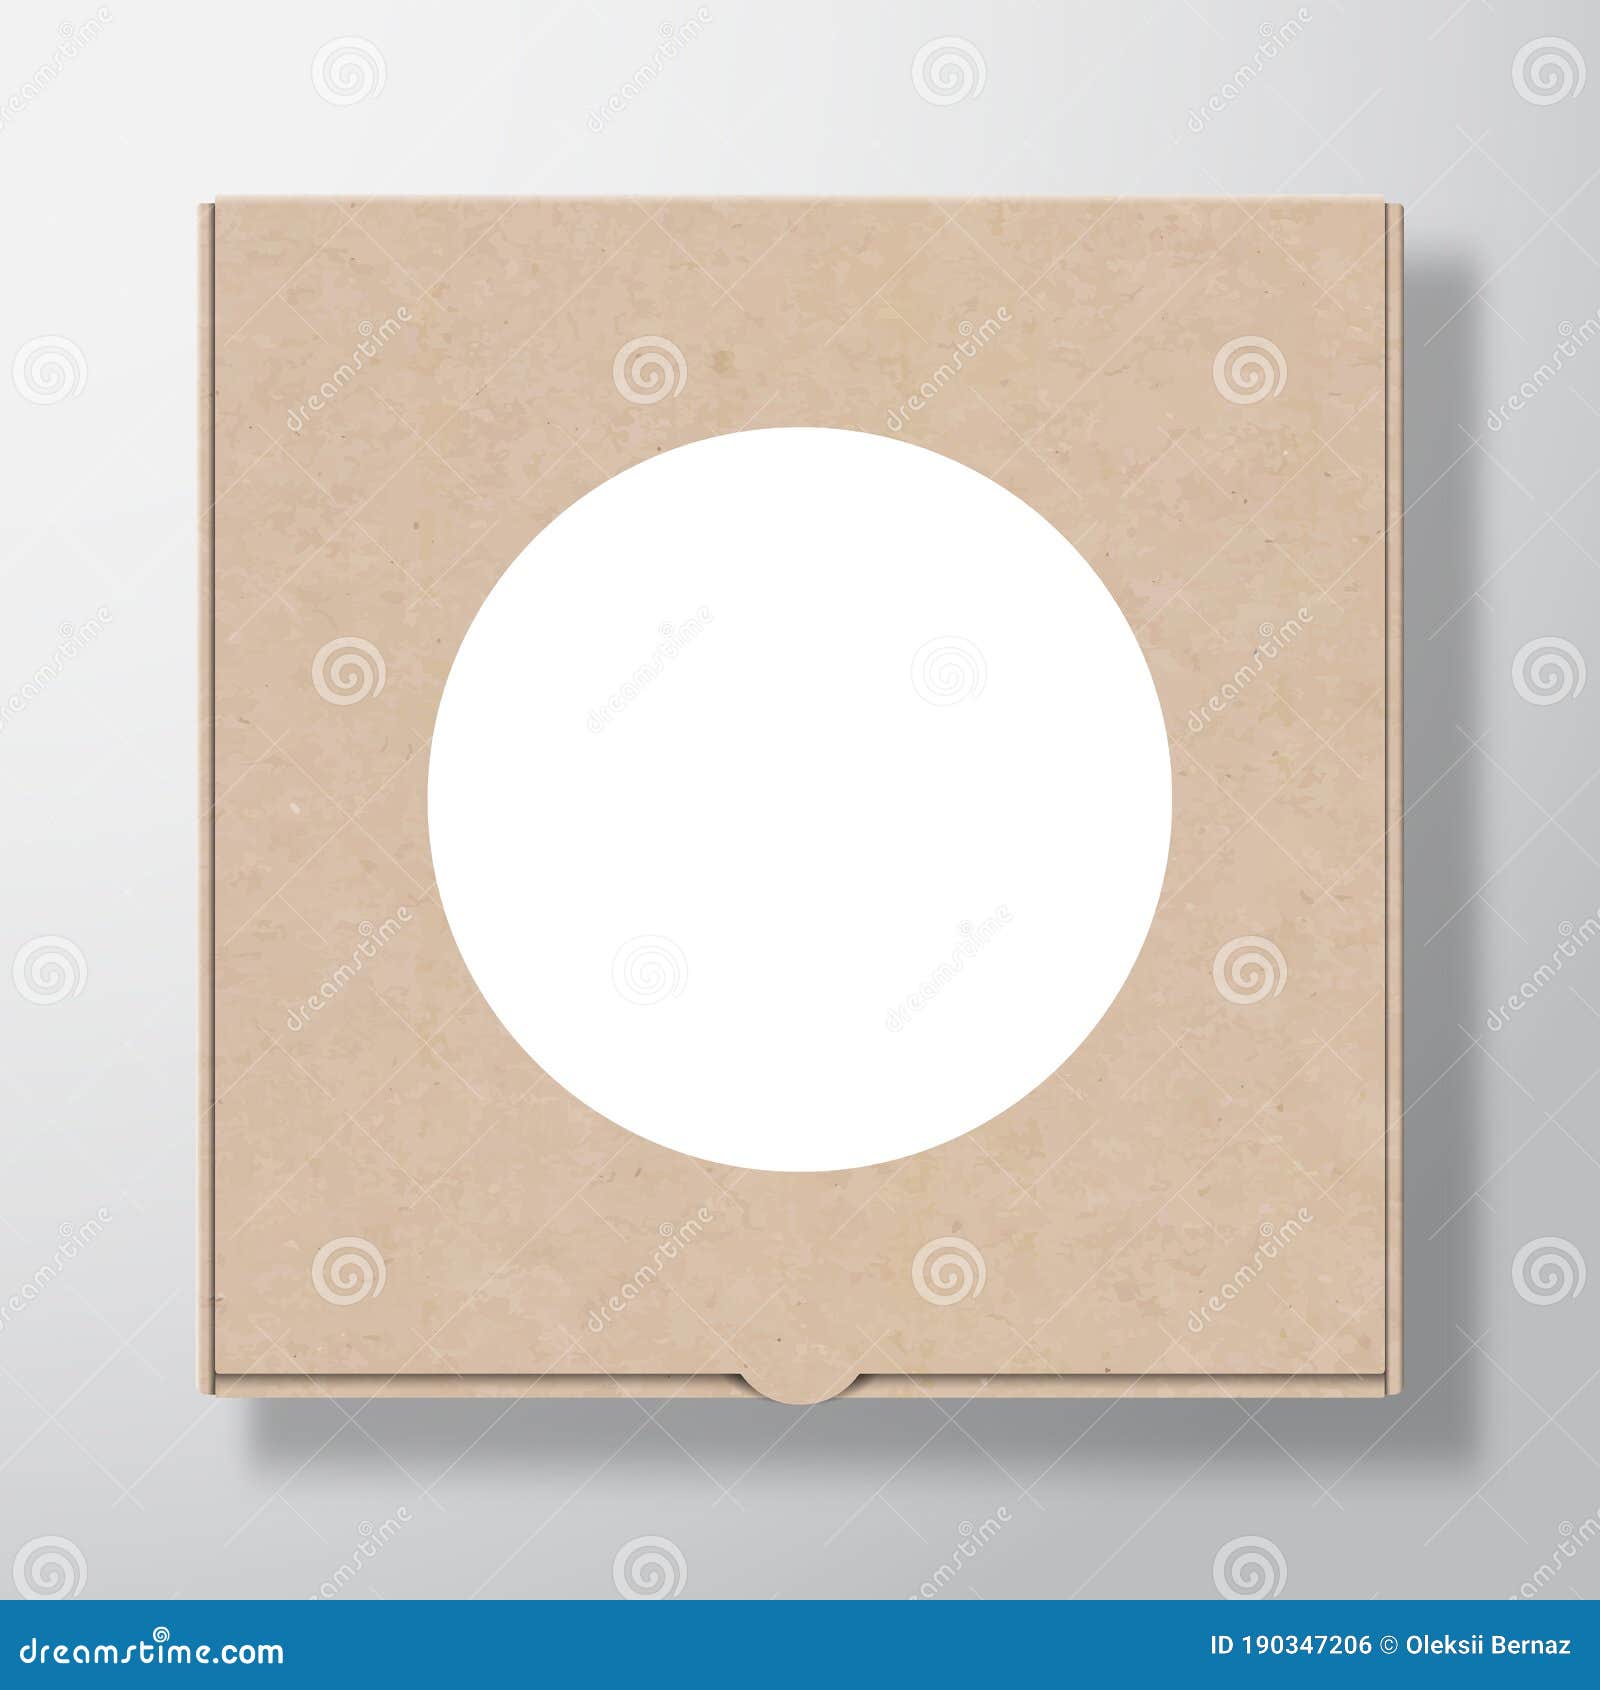 Download Craft Cardboard Pizza Box Container With Clear White Round Label Template. Realistic Carton ...